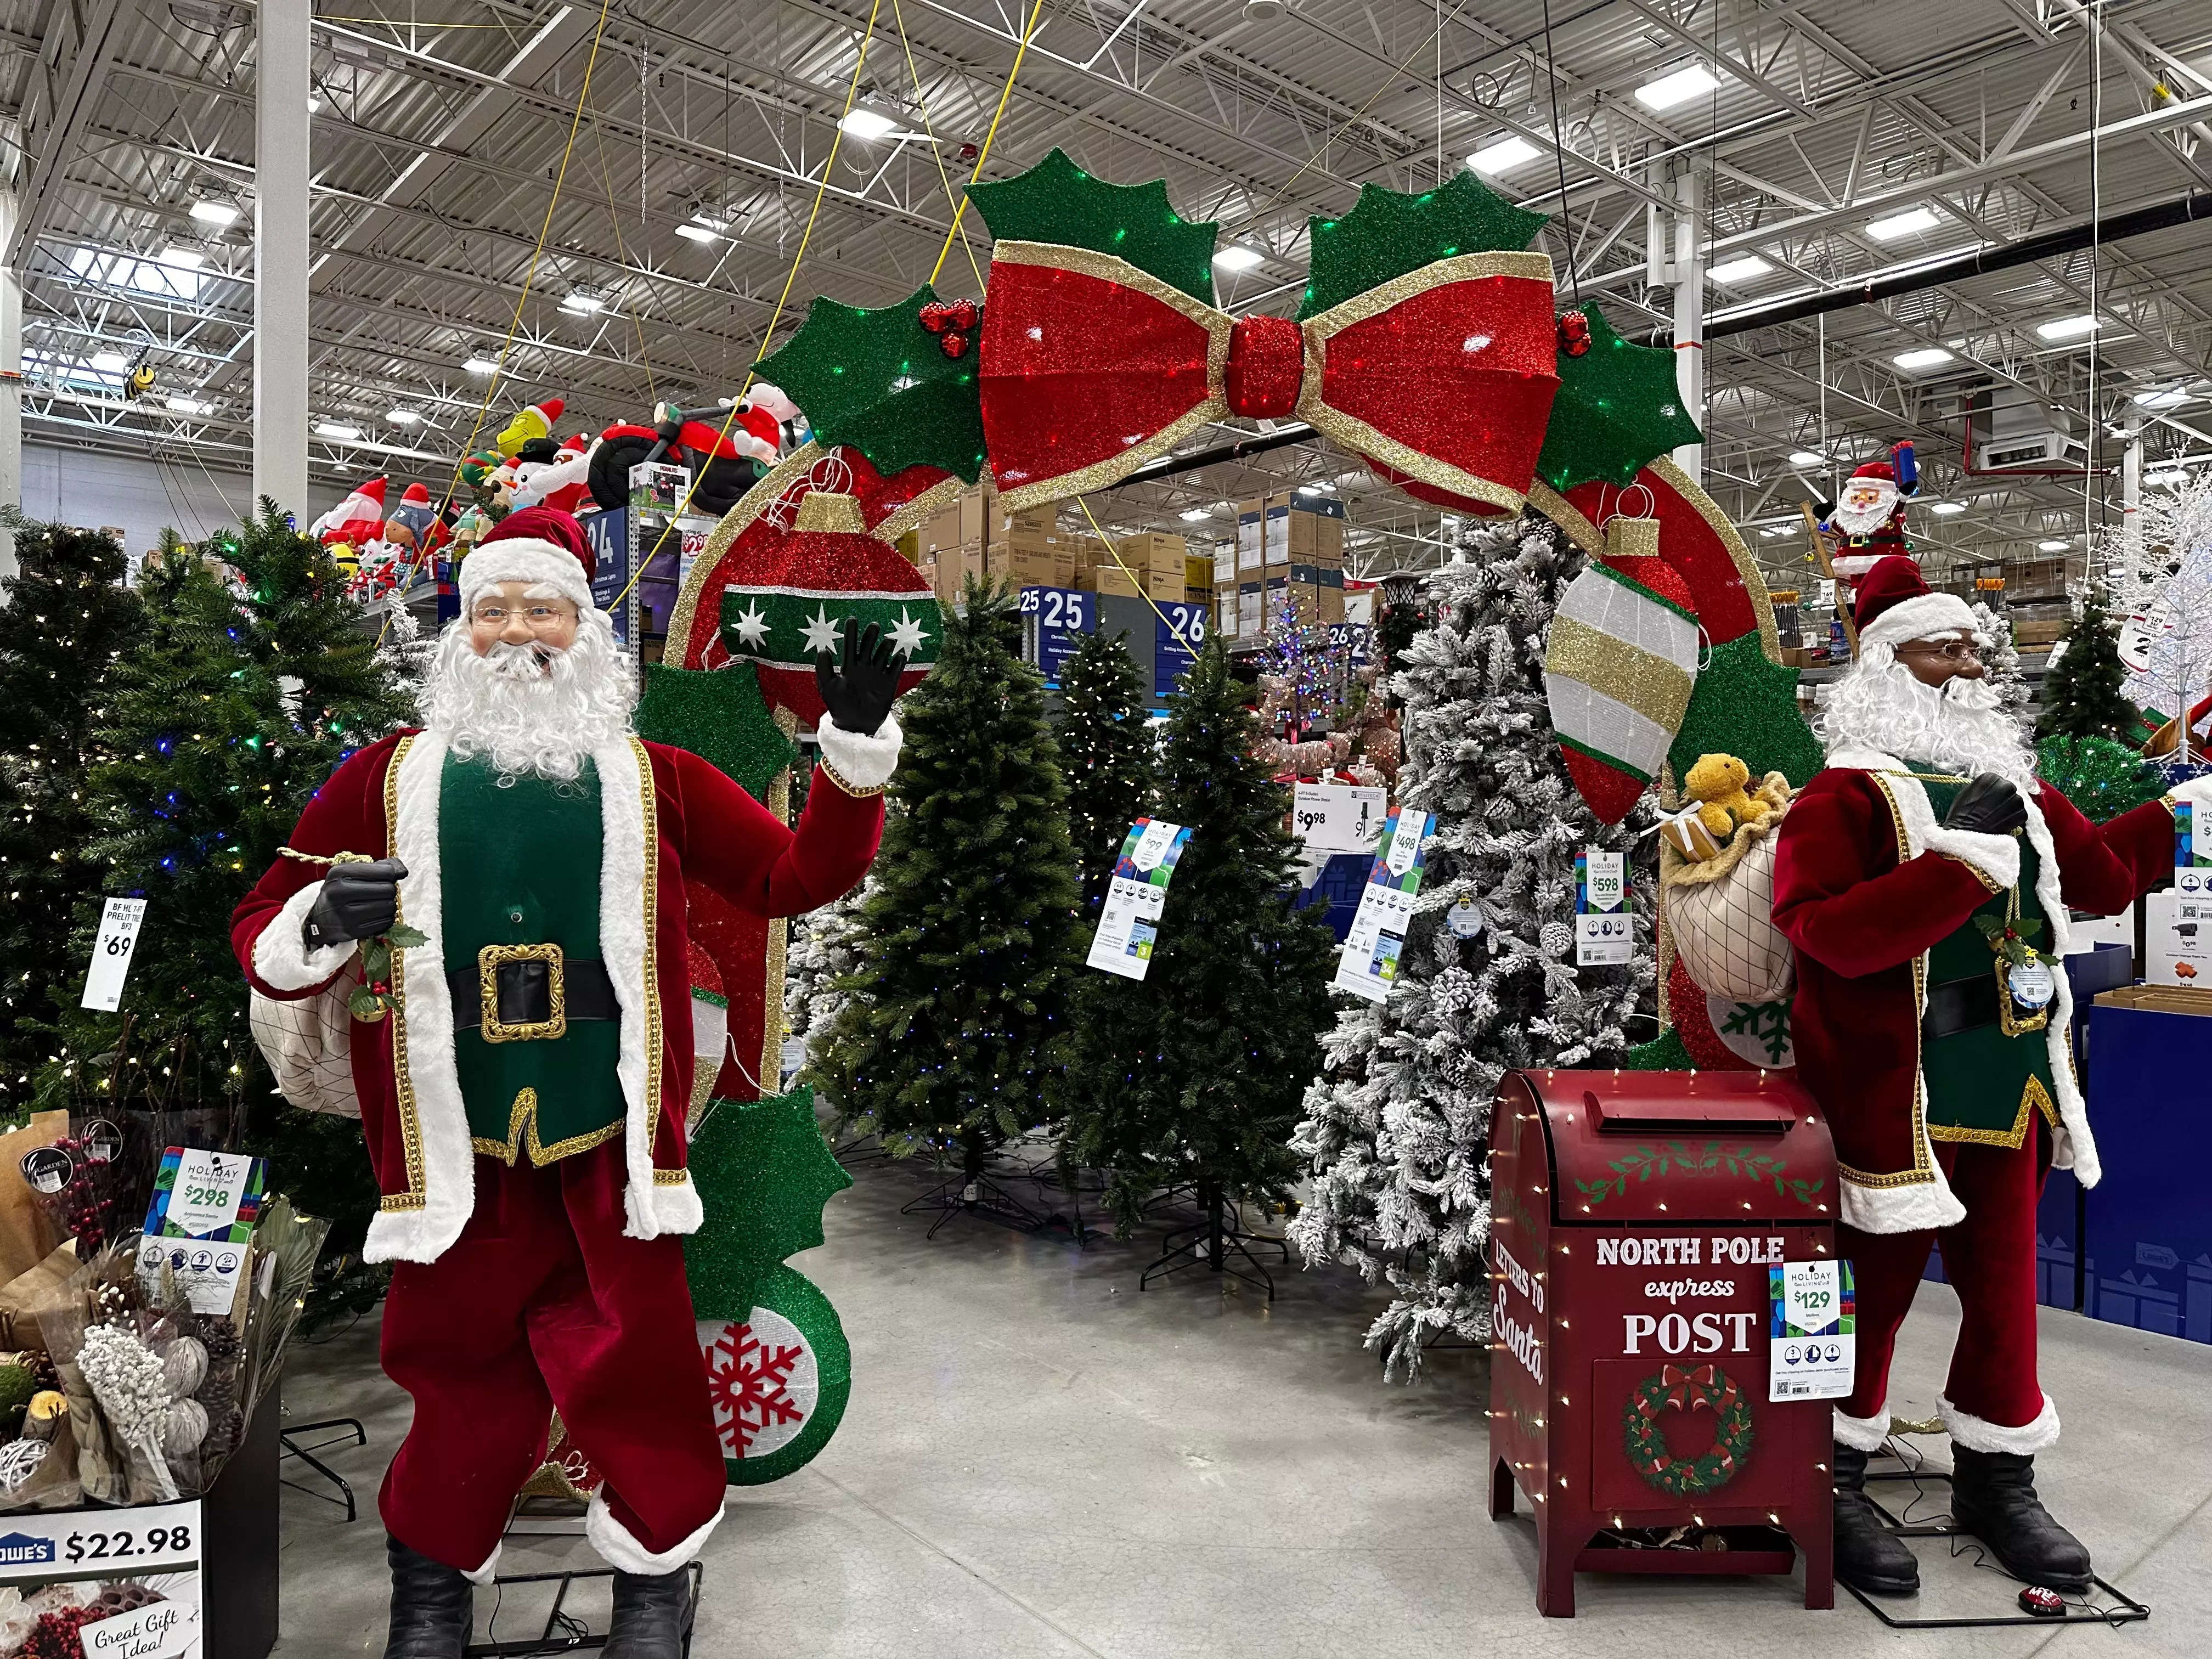 I shopped at Home Depot and Lowe's for holiday decorations, and one ...